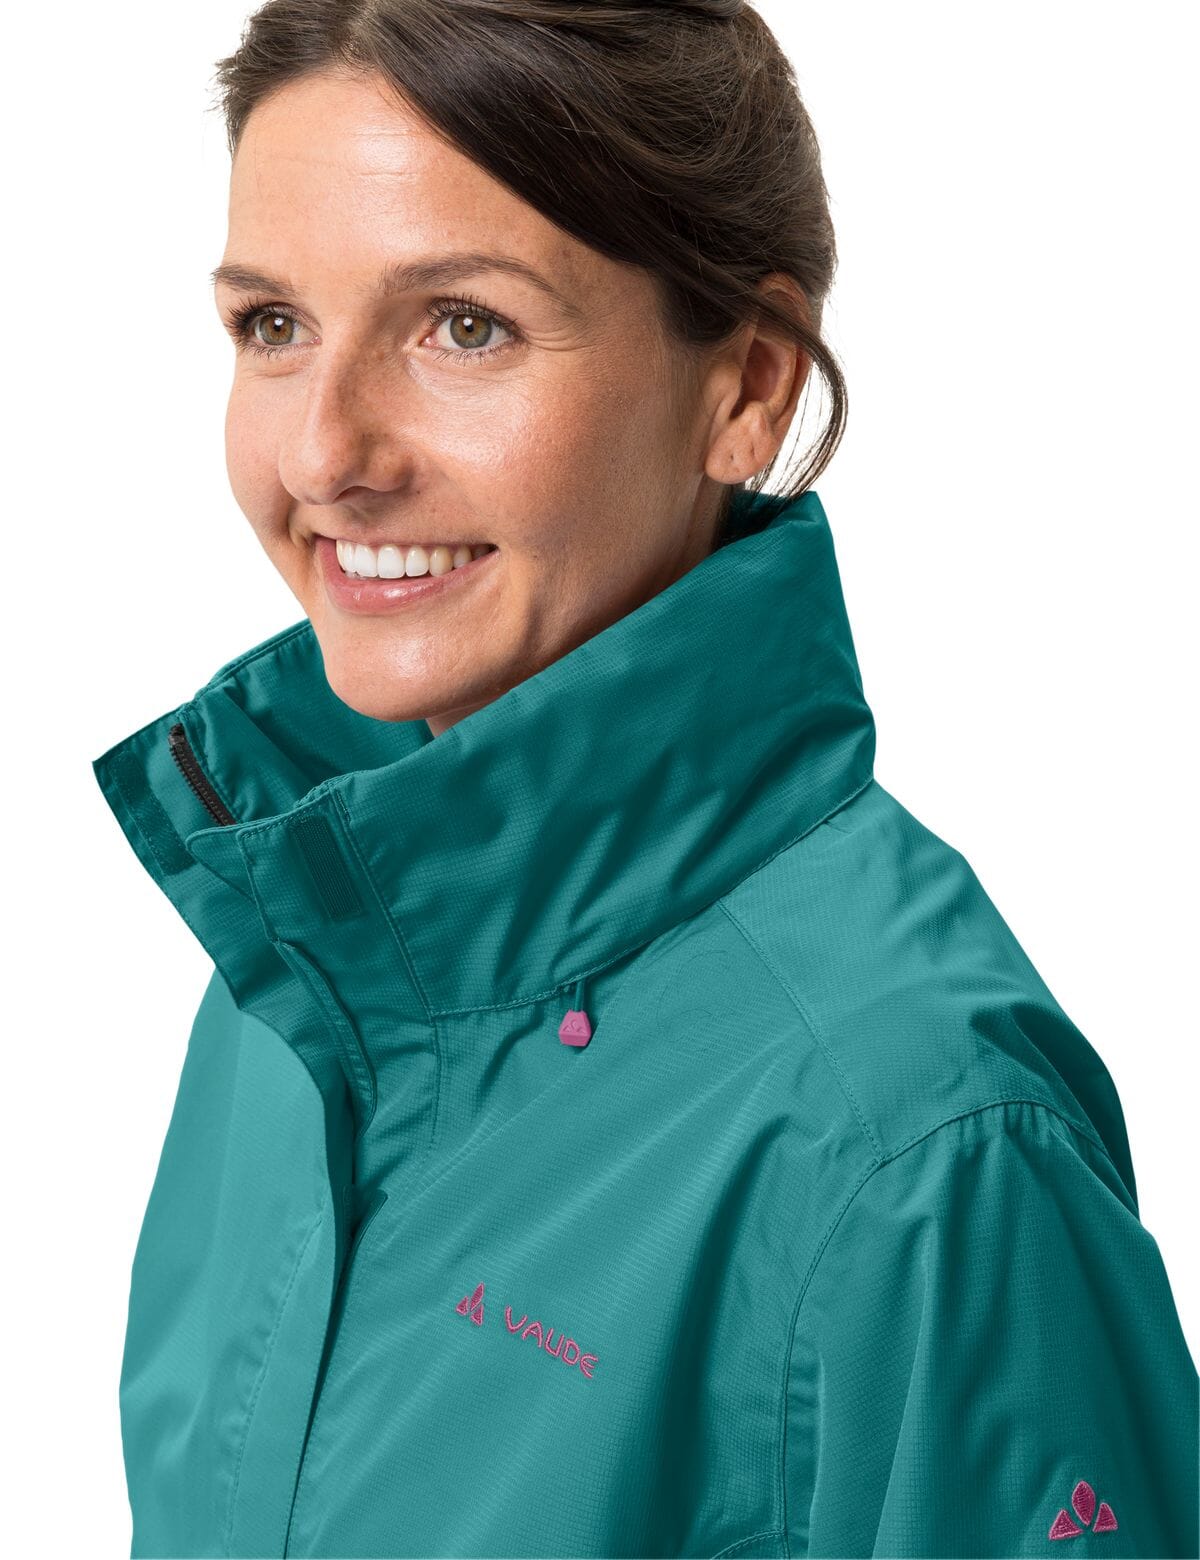 Vaude W´s Escape Light rain jacket - Recycled polyester & polyester Wave Jacket